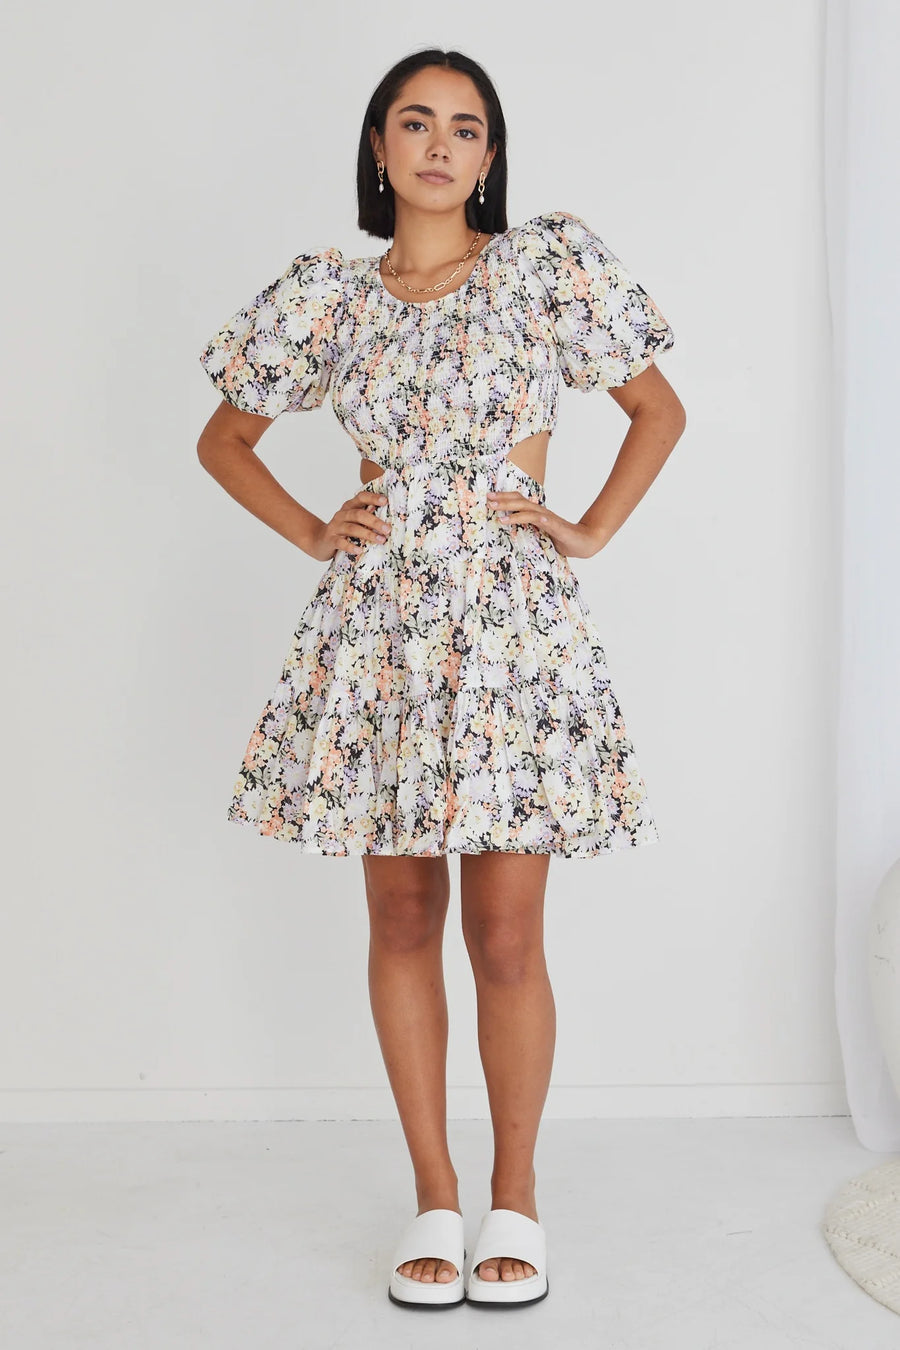 IVY + JACK HAILEY BLACK FLORAL SHIRRED COTTON PUFF SS WAIST CUT OUT TIERED MINI DRESS - WILDROSE